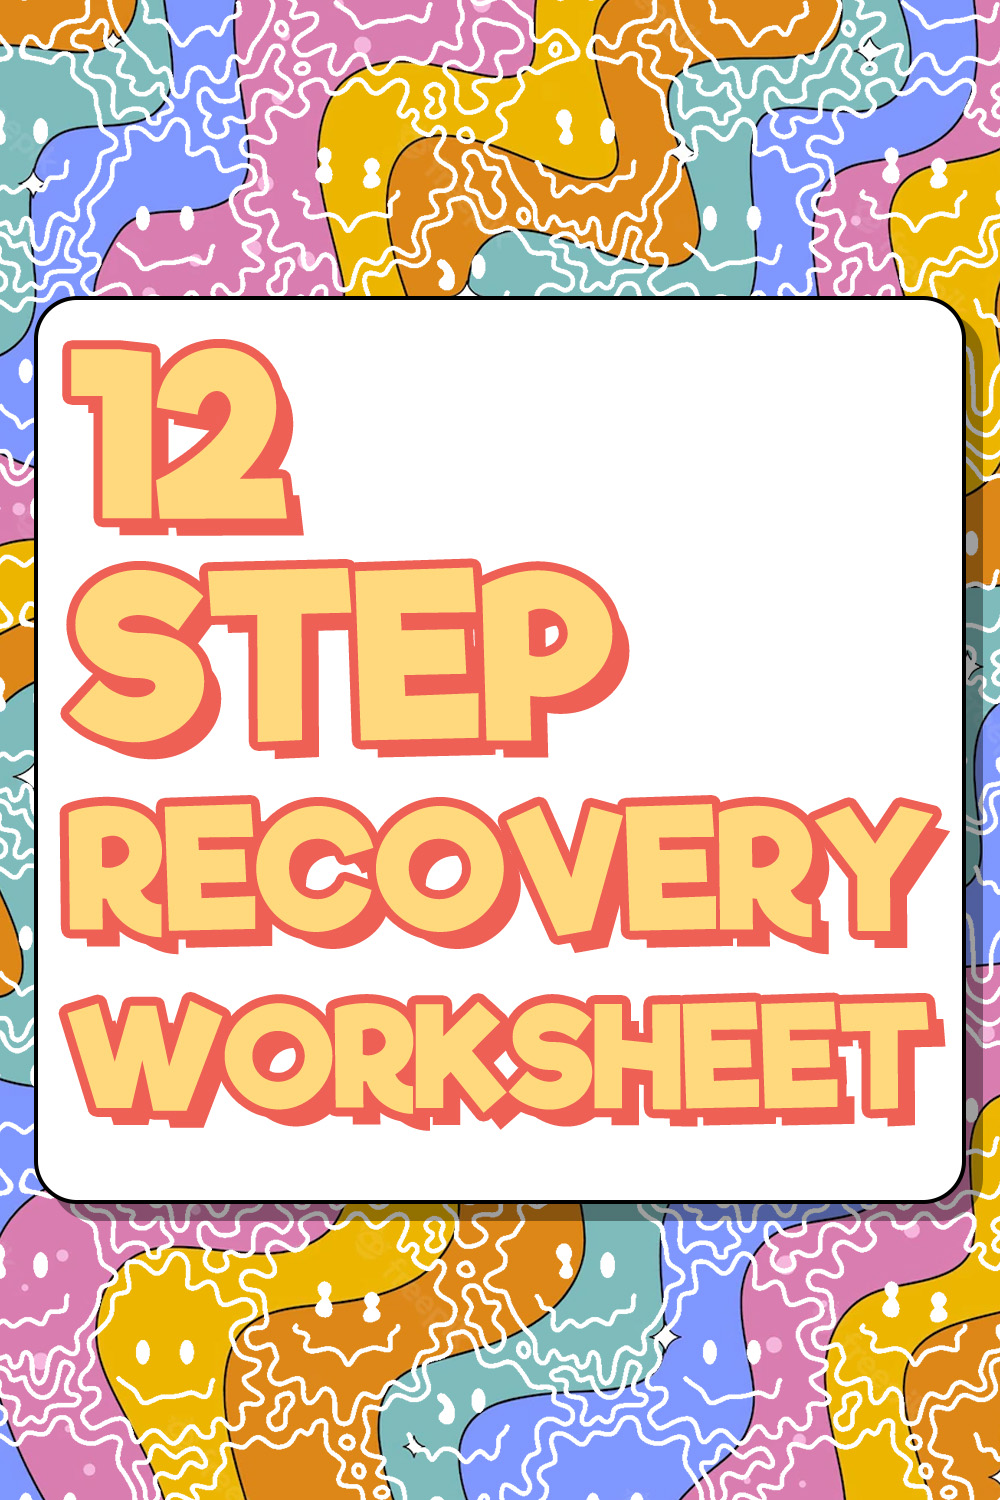 15 Images of 12 Step Recovery Worksheets